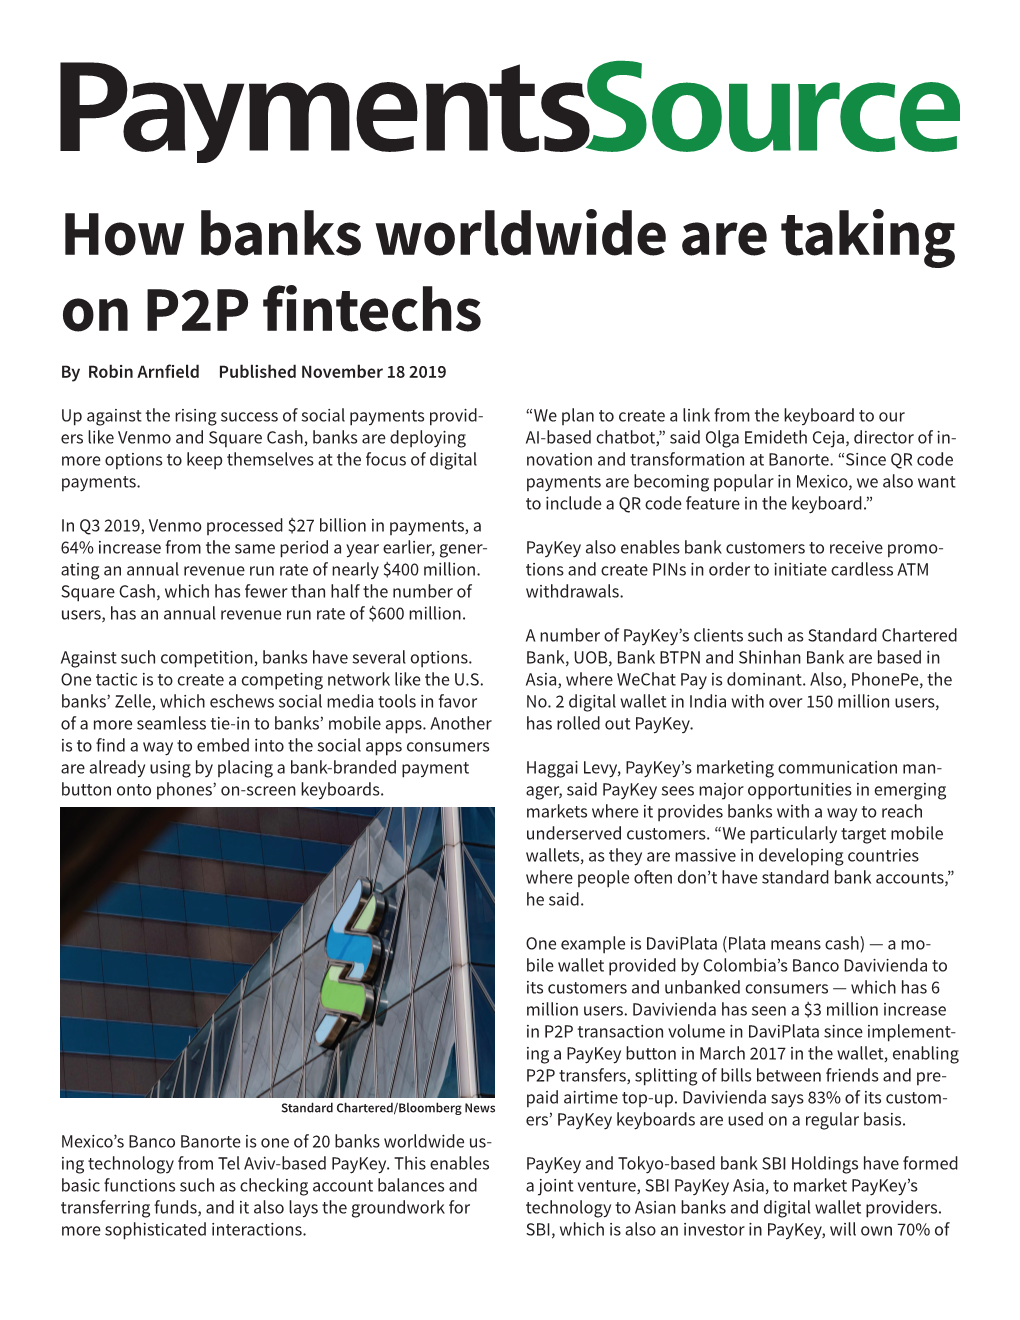 How Banks Worldwide Are Taking on P2P Fintechs by Robin Arnfield Published November 18 2019